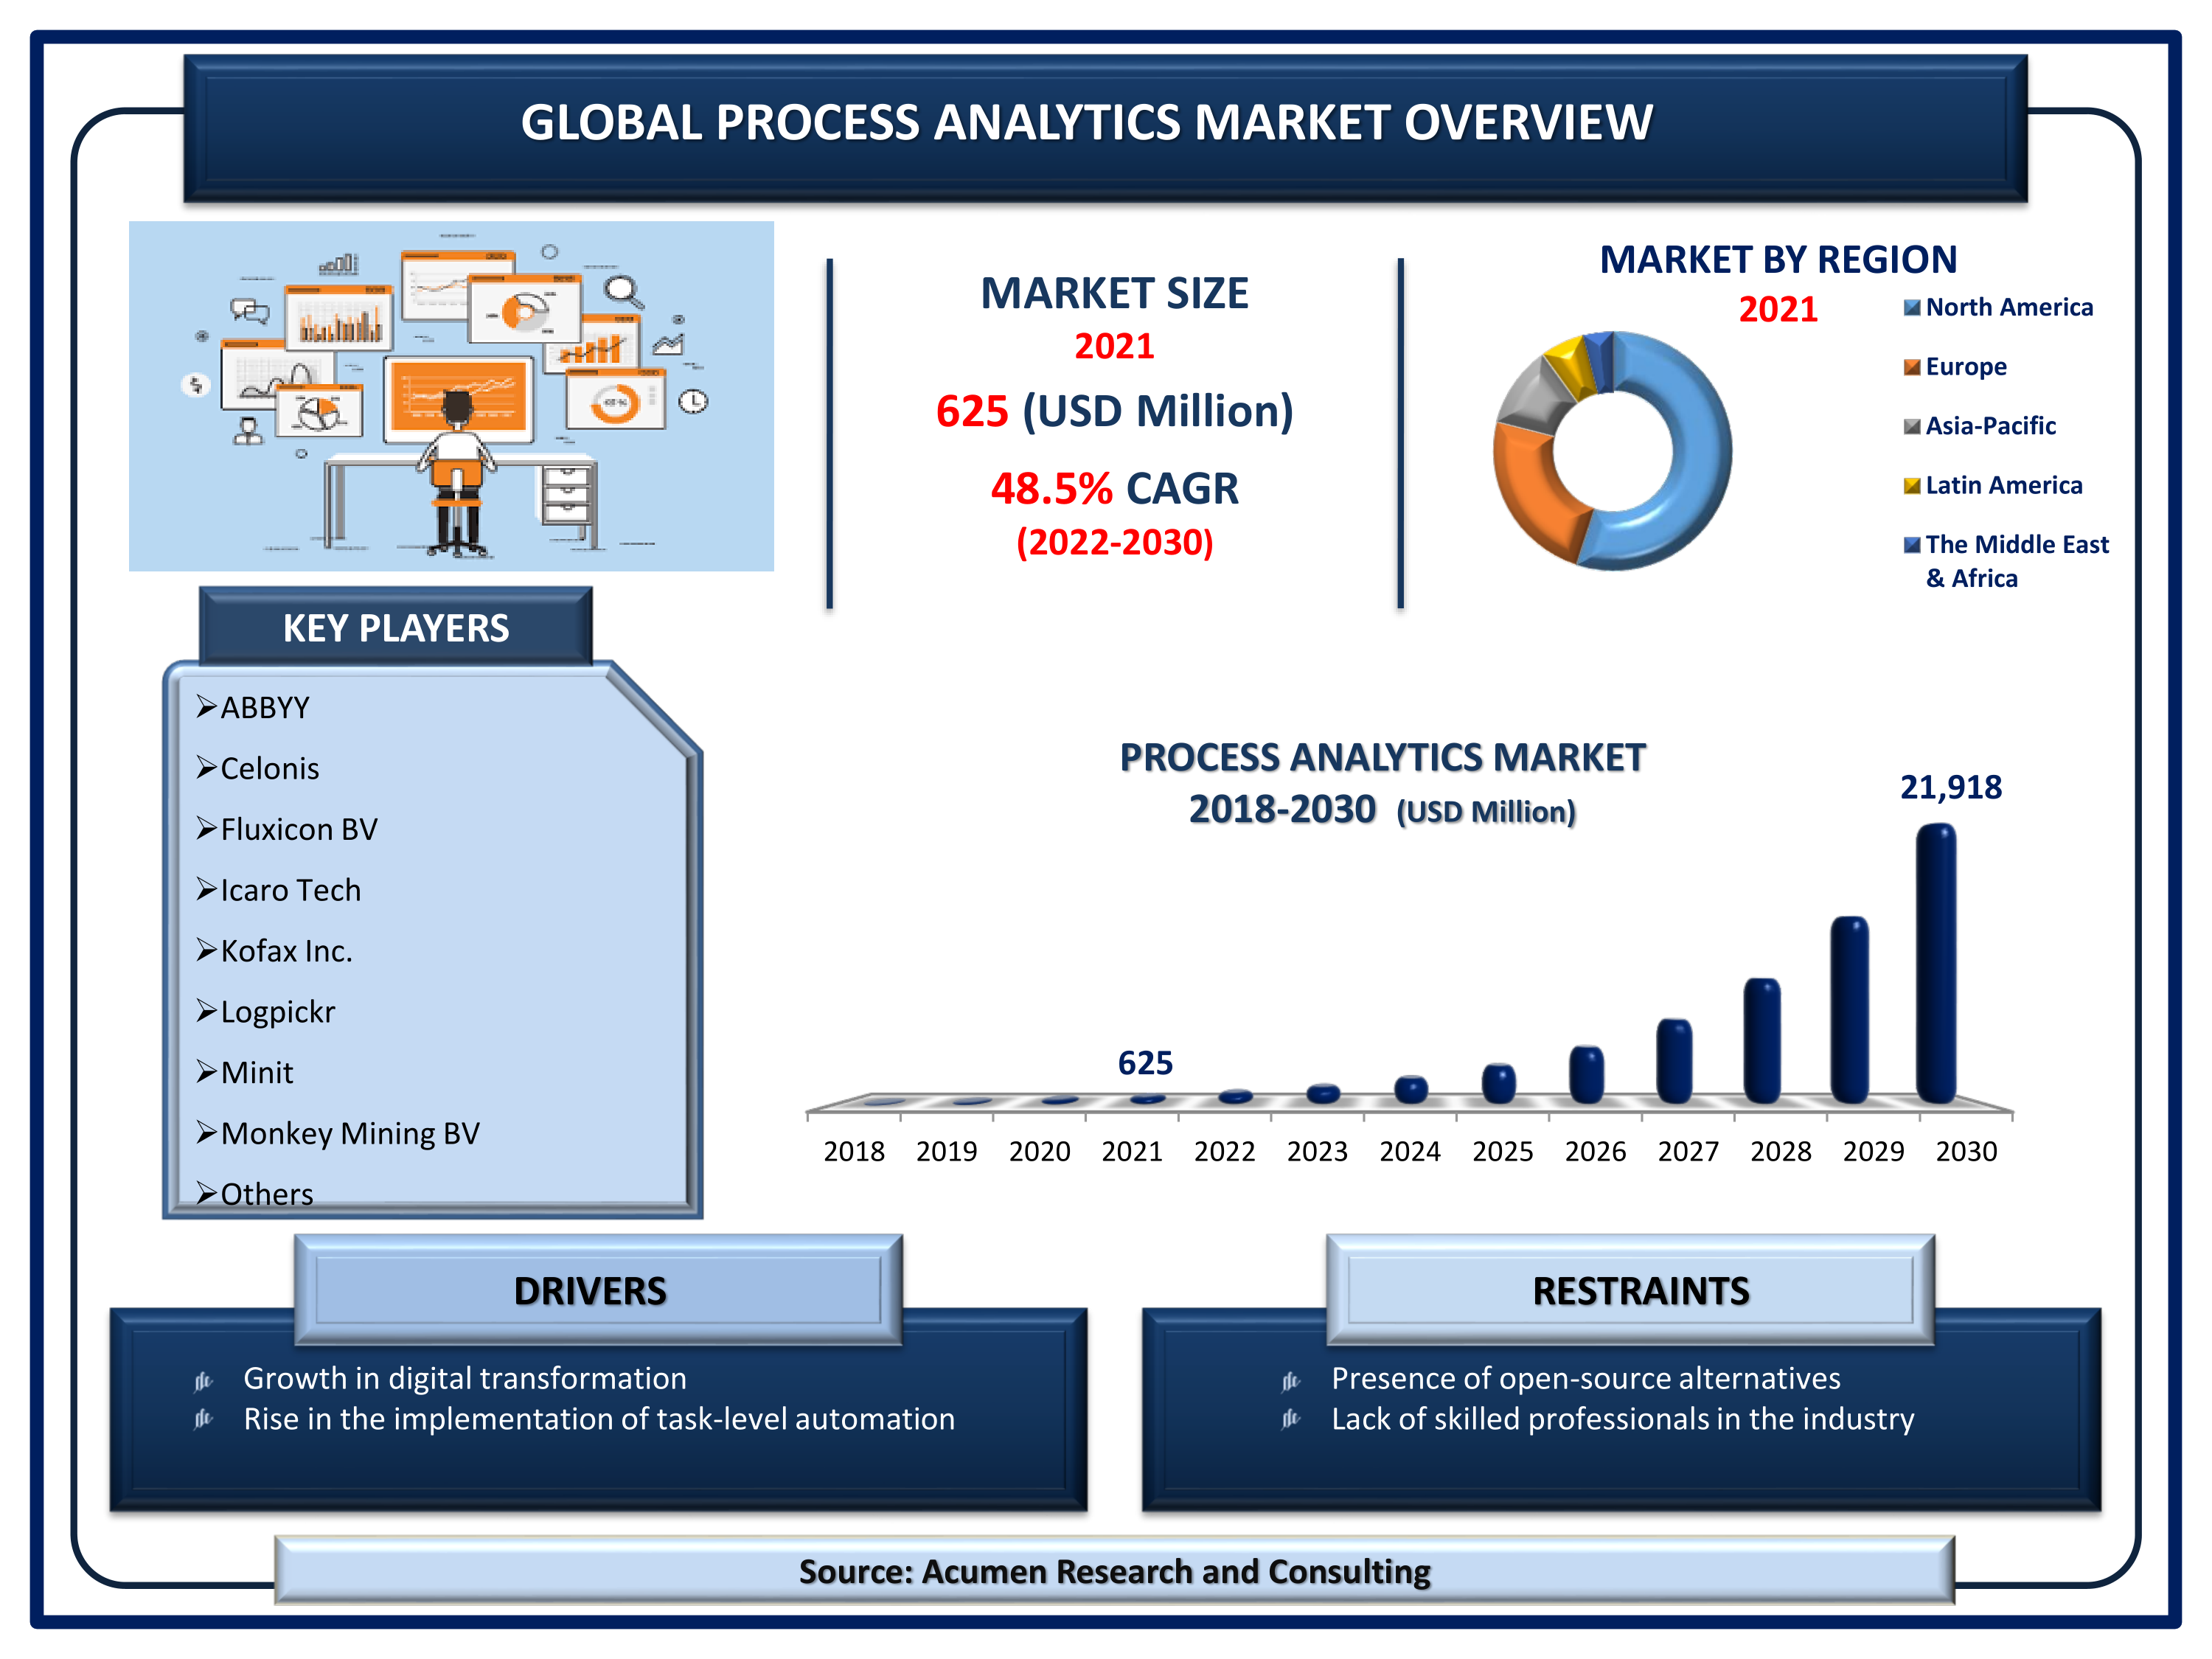 Process Analytics Market is projected to reach USD 21,918 Million by 2030 growing at a CAGR of 48.5%